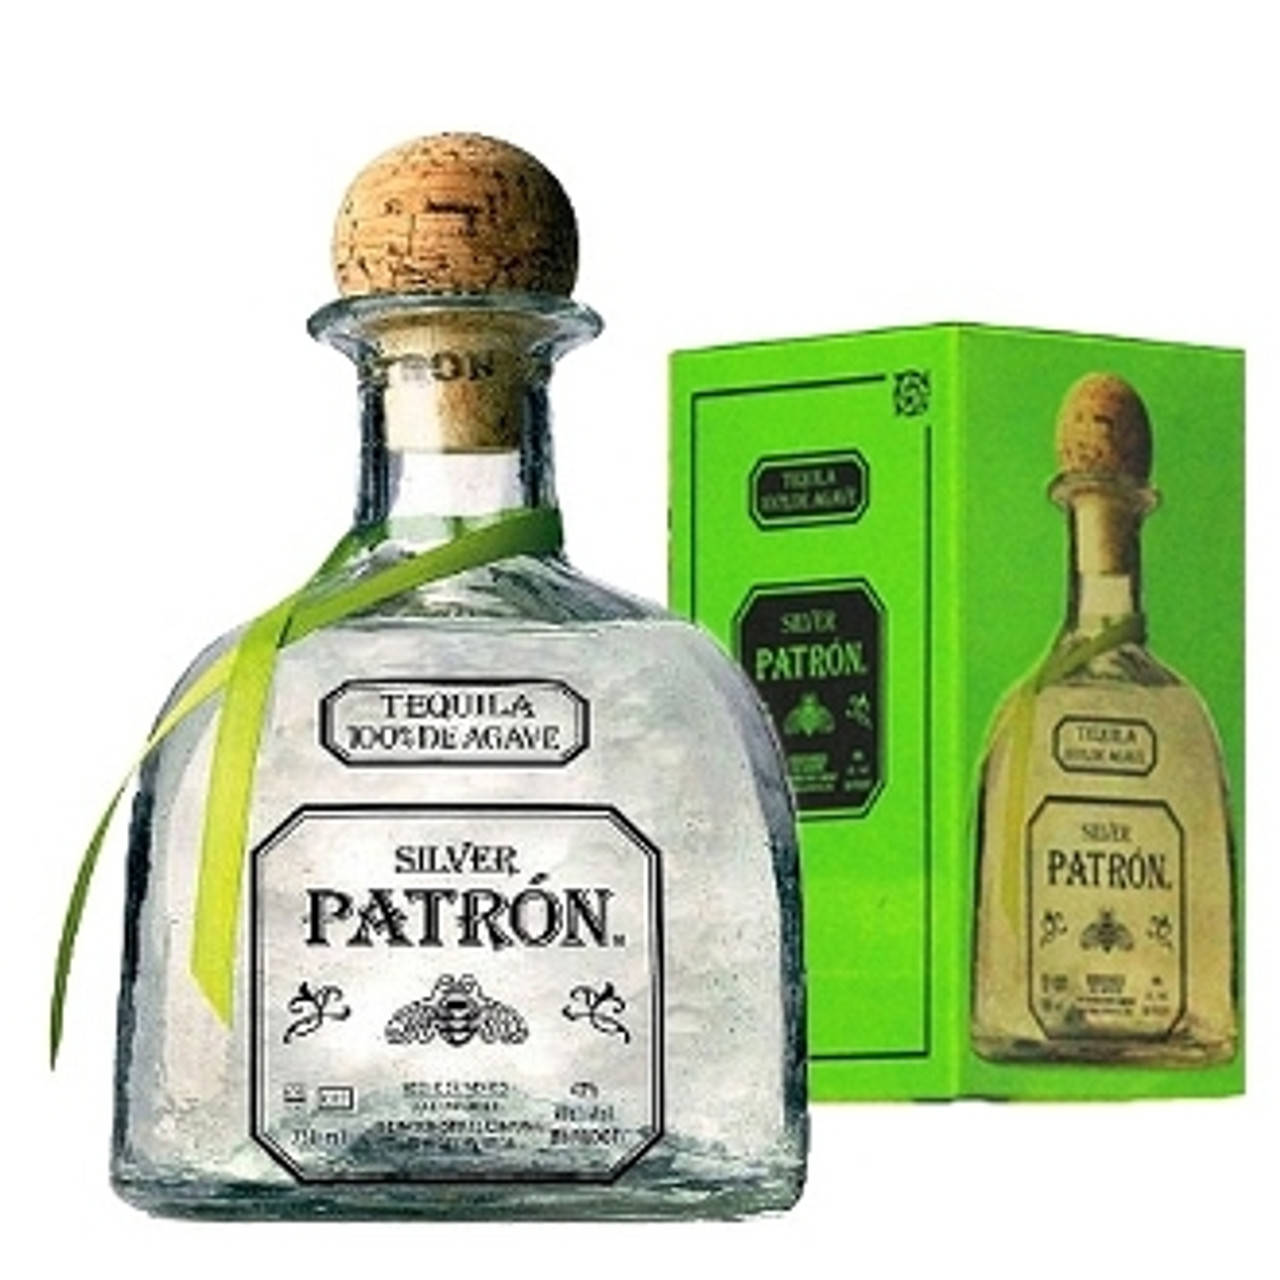 Patron Tequila Silver Bottle and Box Wallpaper